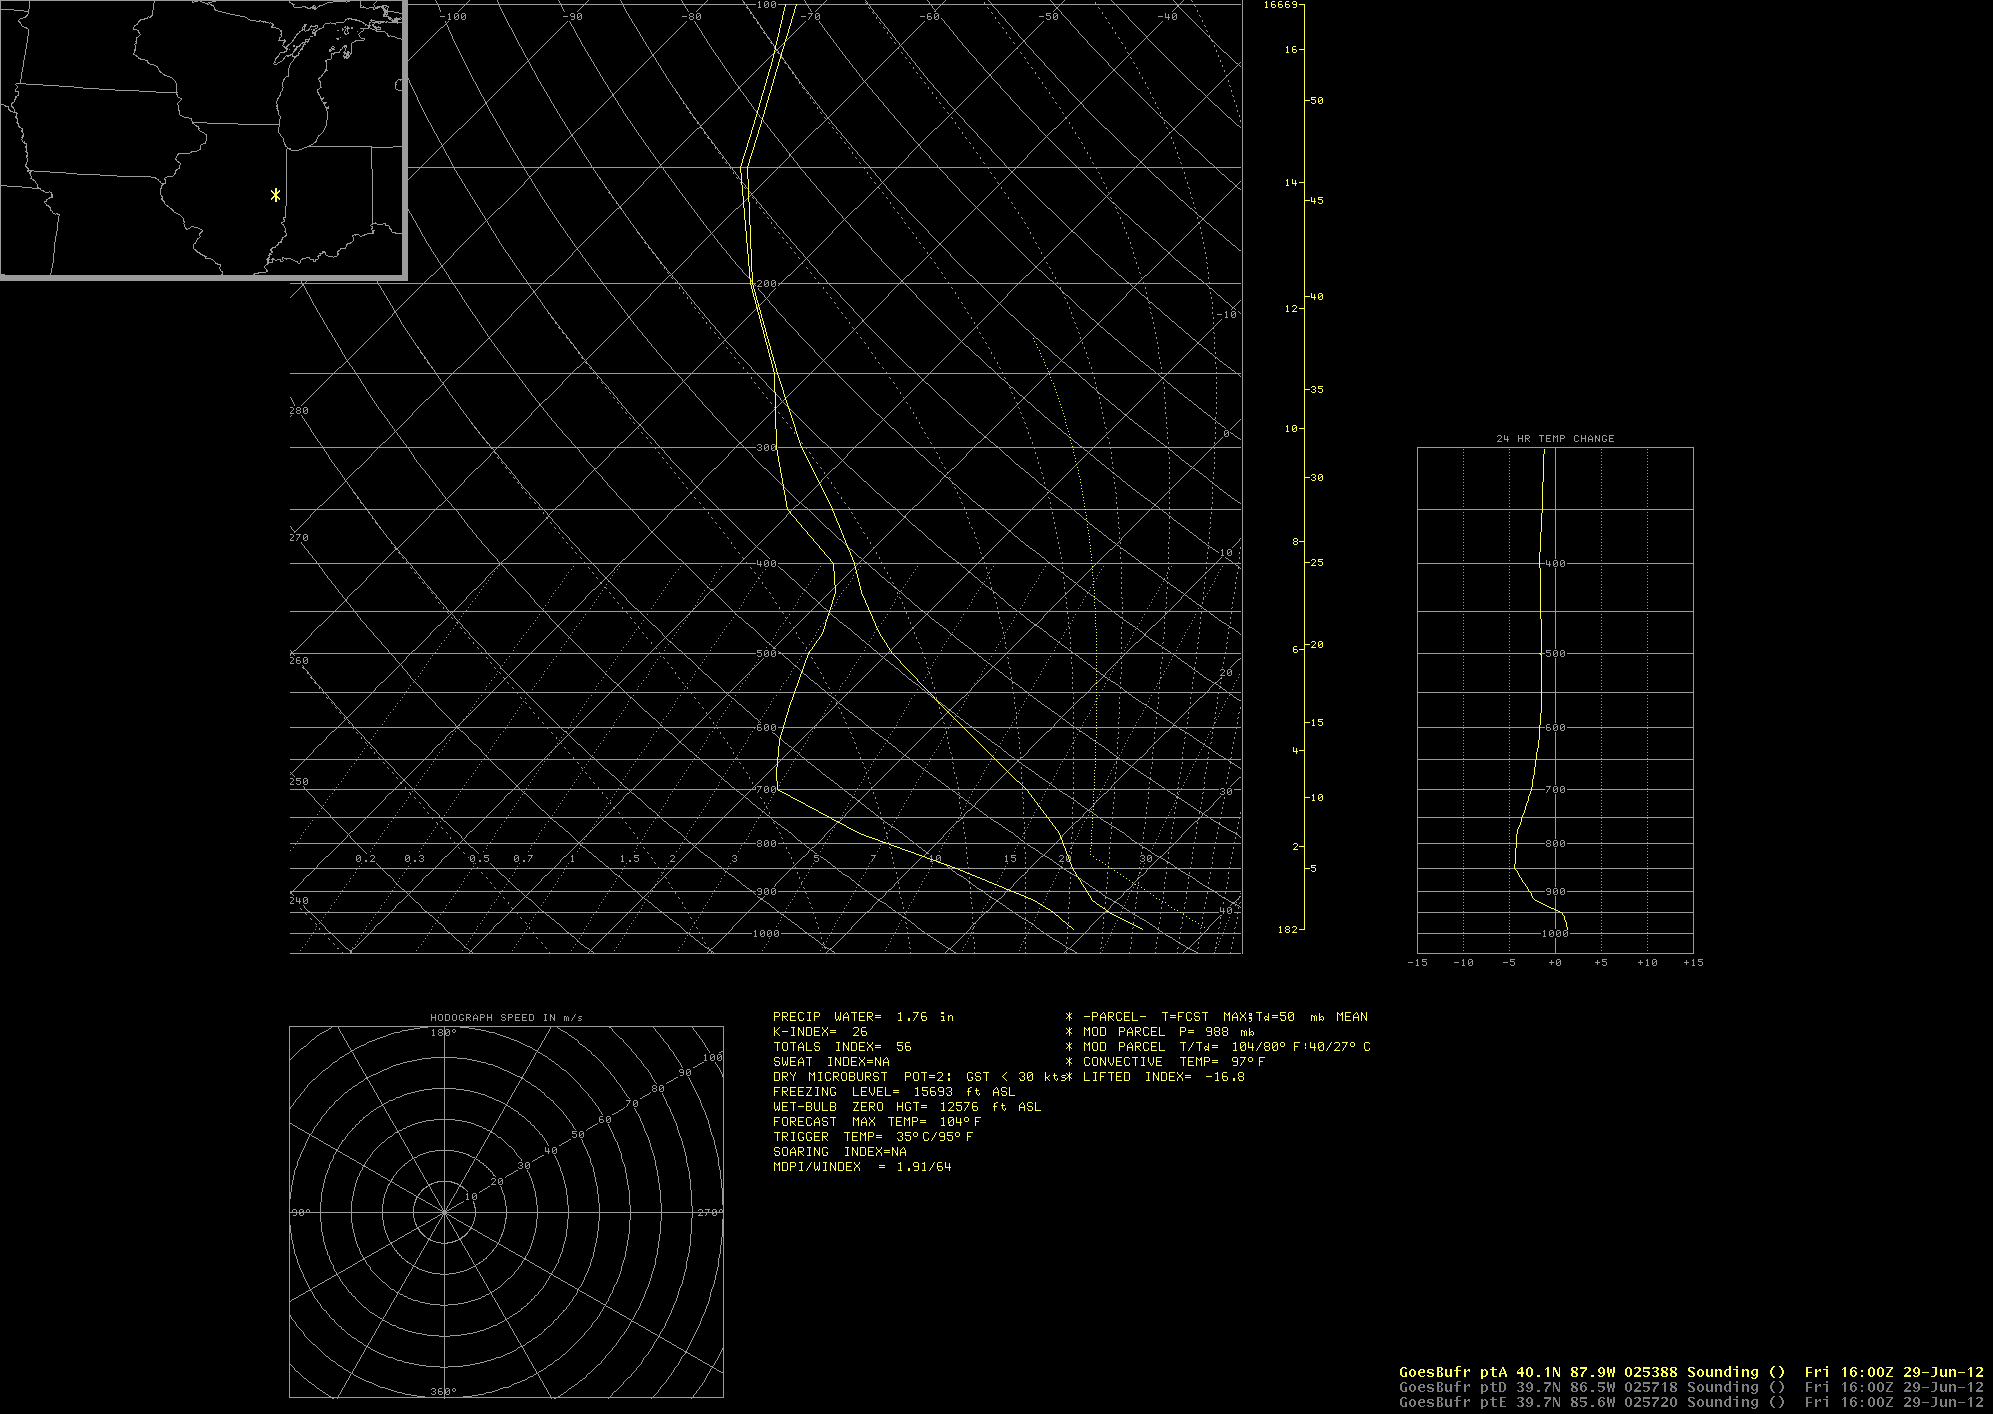 GOES-13 sounder vertical profiles of temperature and dew point